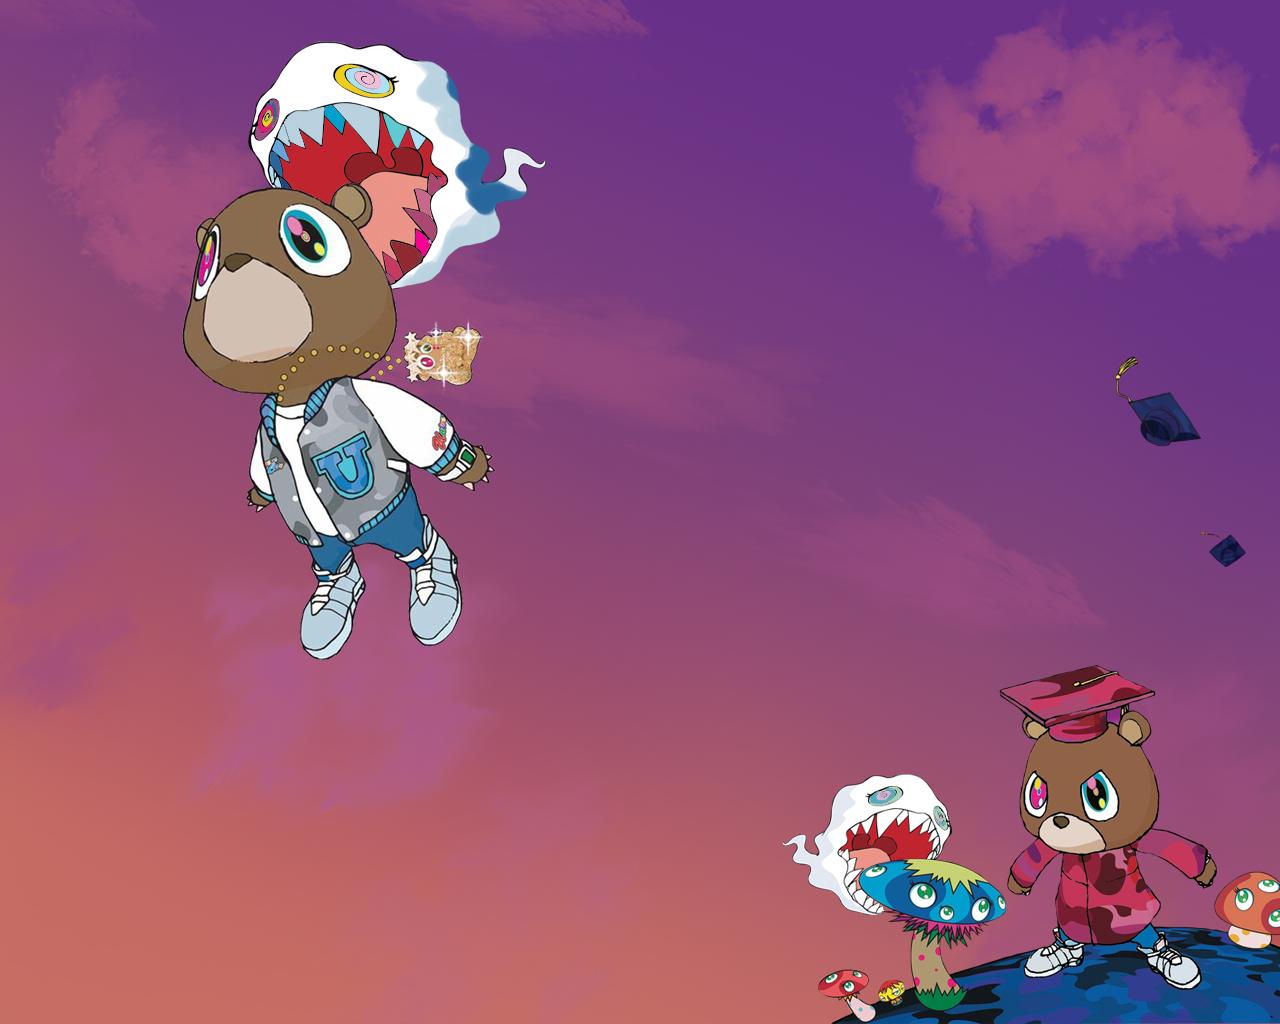 Kanye West Bear Wallpapers.